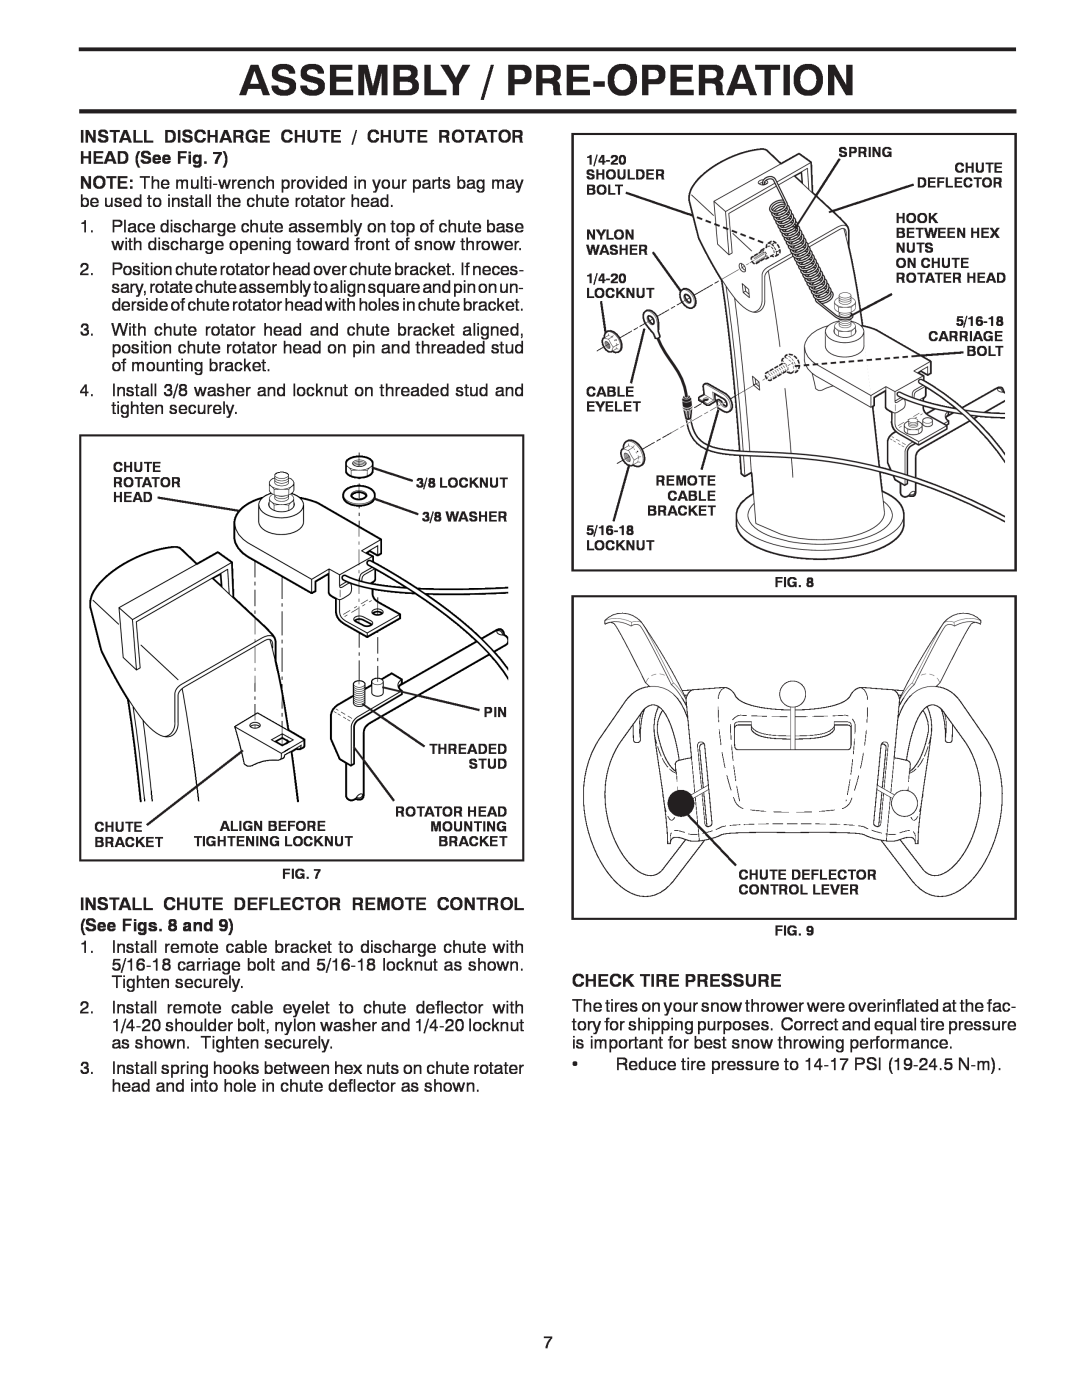 Poulan 415242 Assembly / Pre-Operation, INSTALL DISCHARGE CHUTE / CHUTE ROTATOR HEAD See Fig, Check Tire Pressure 